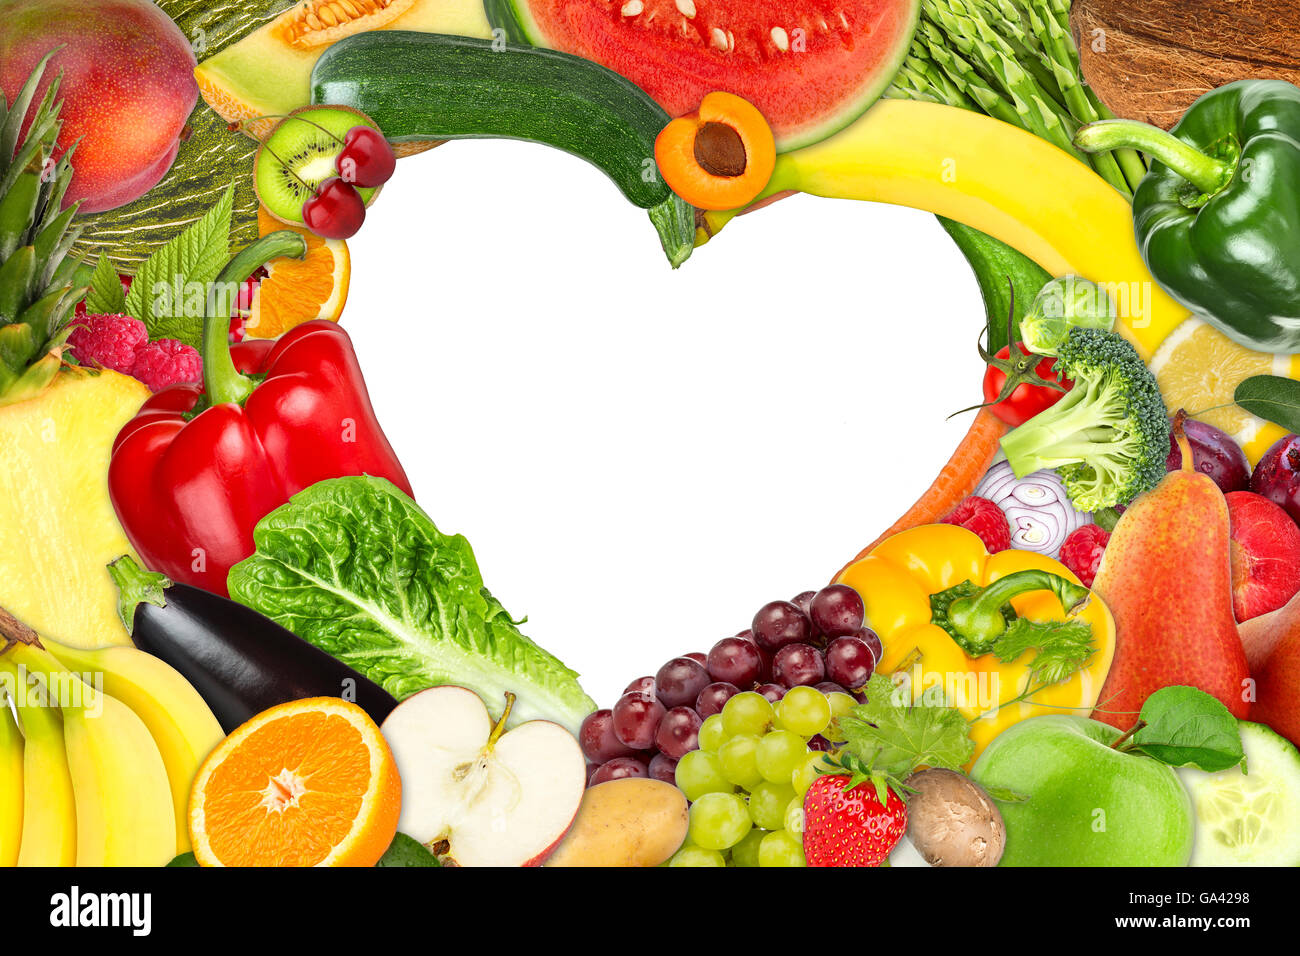 heart shaped frame out of fruits and vegetables isolated on white background Stock Photo